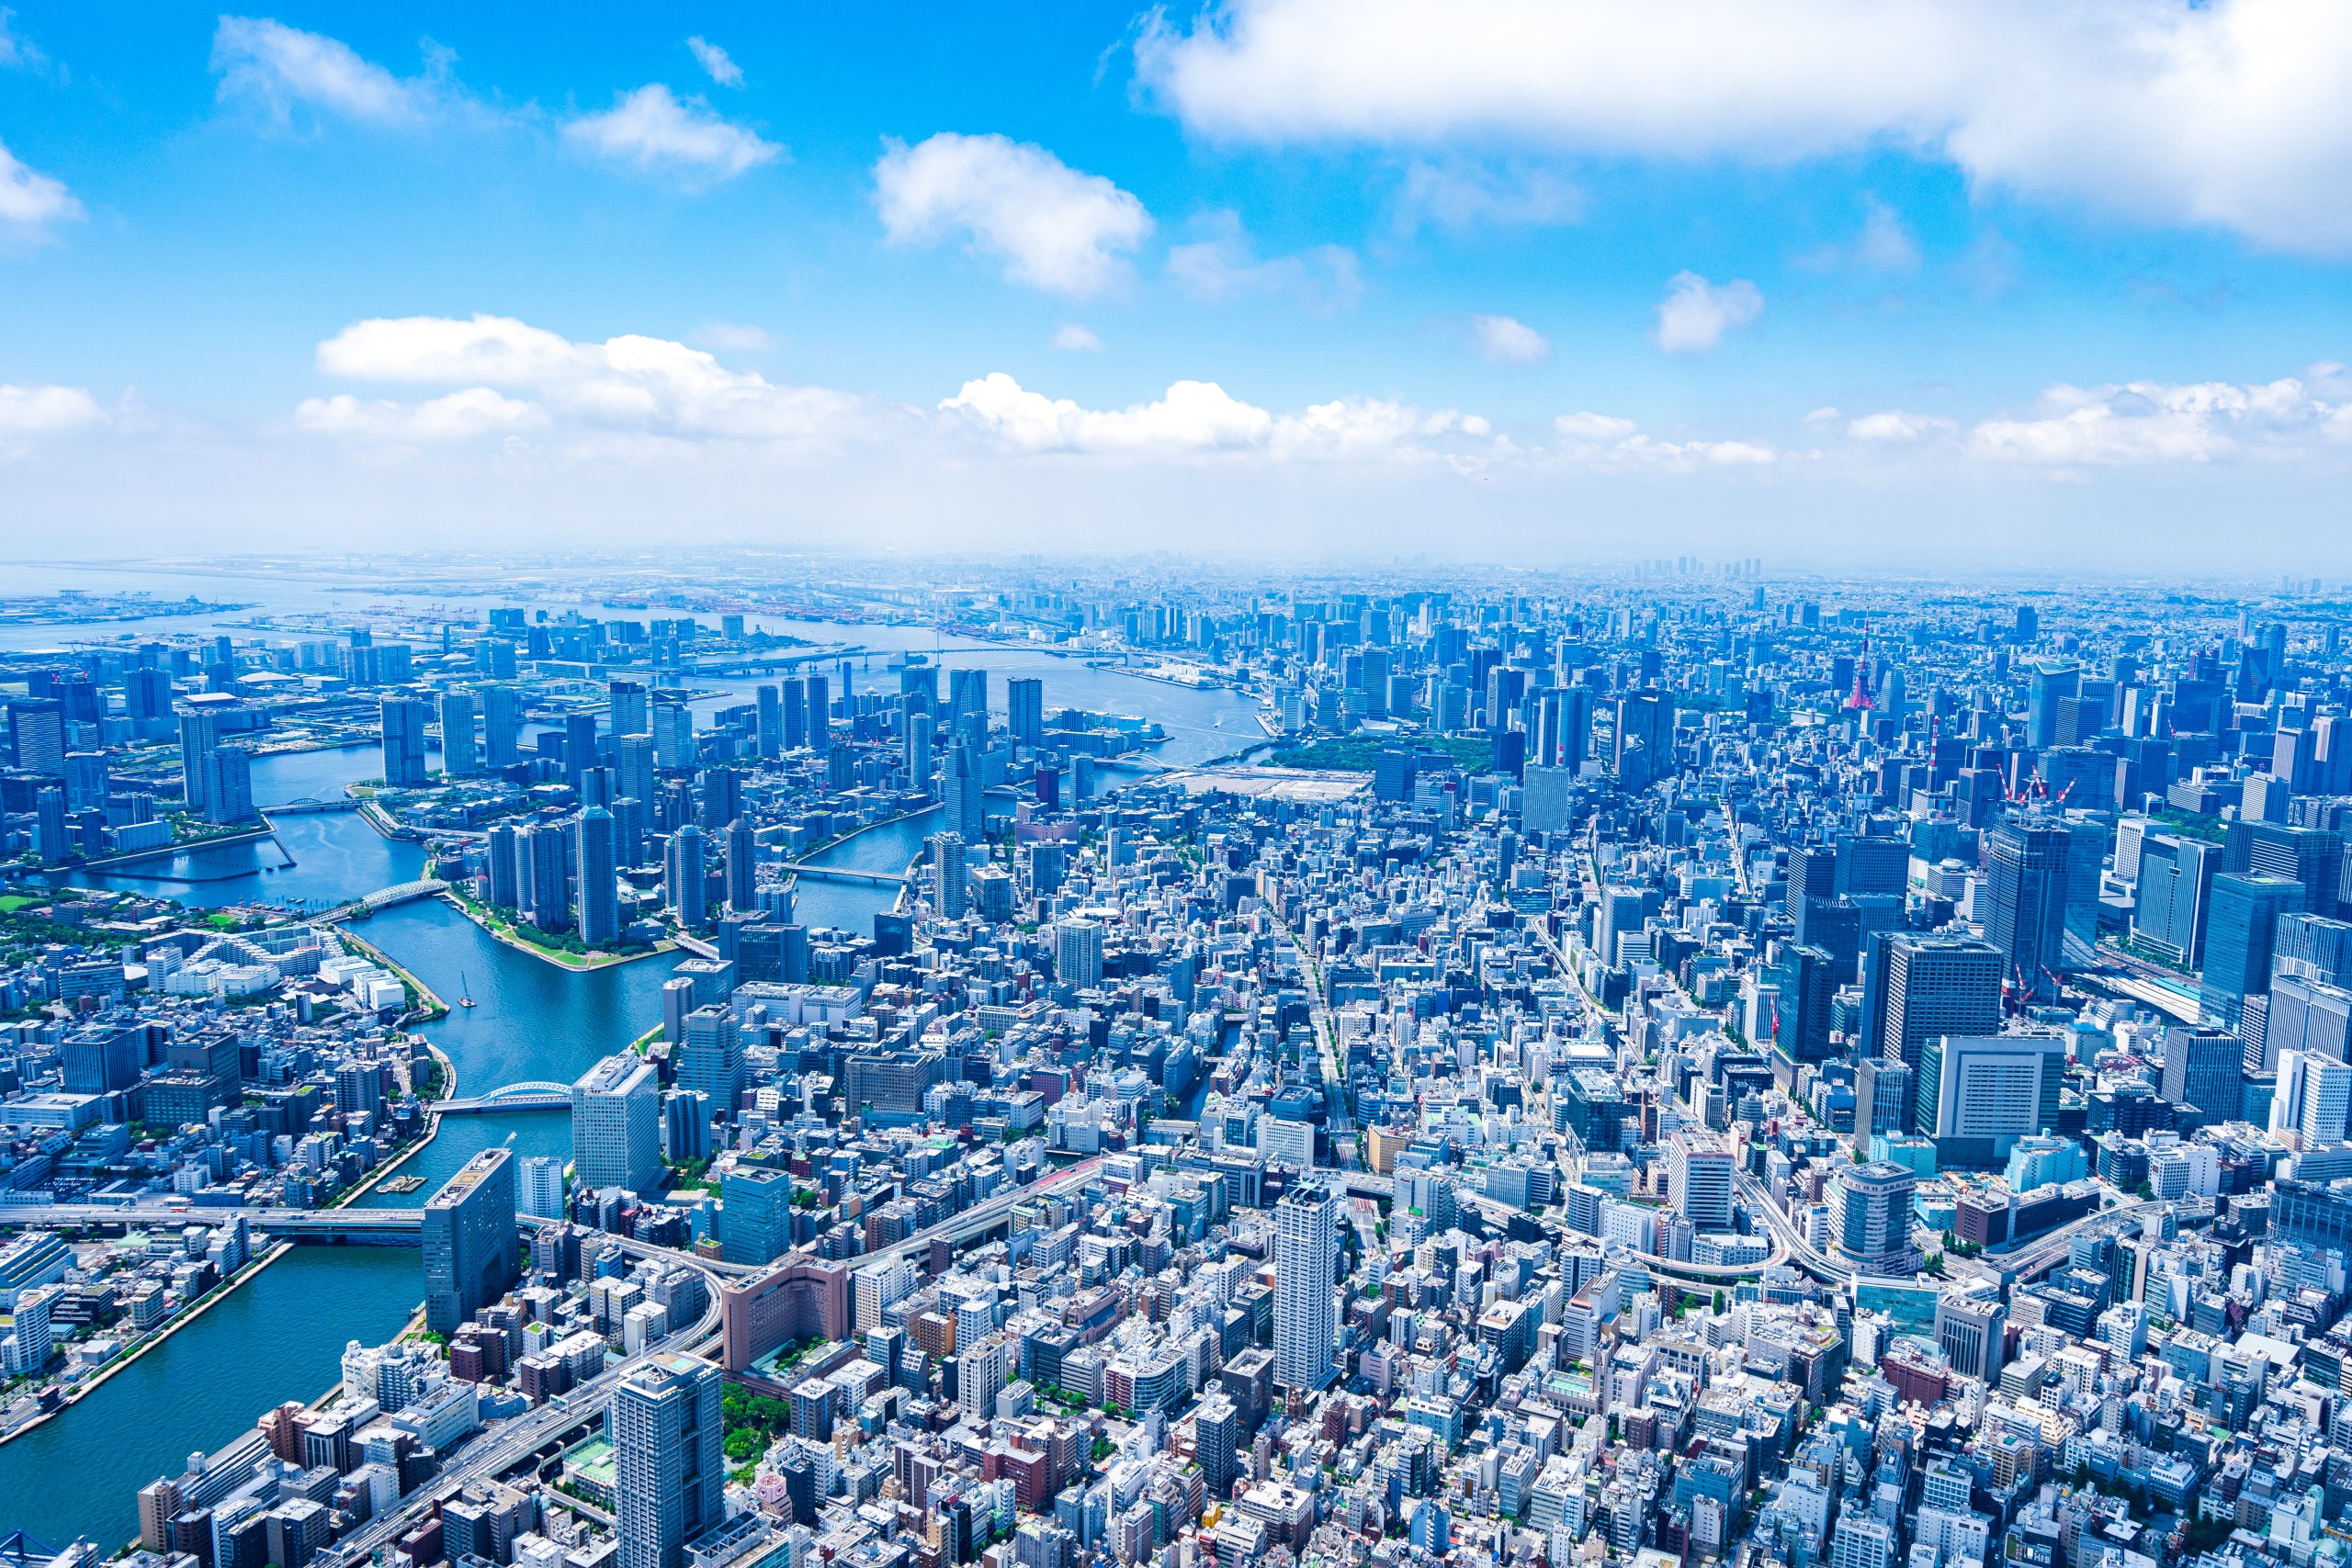 Aerial photograph of Tokyo Bay Area